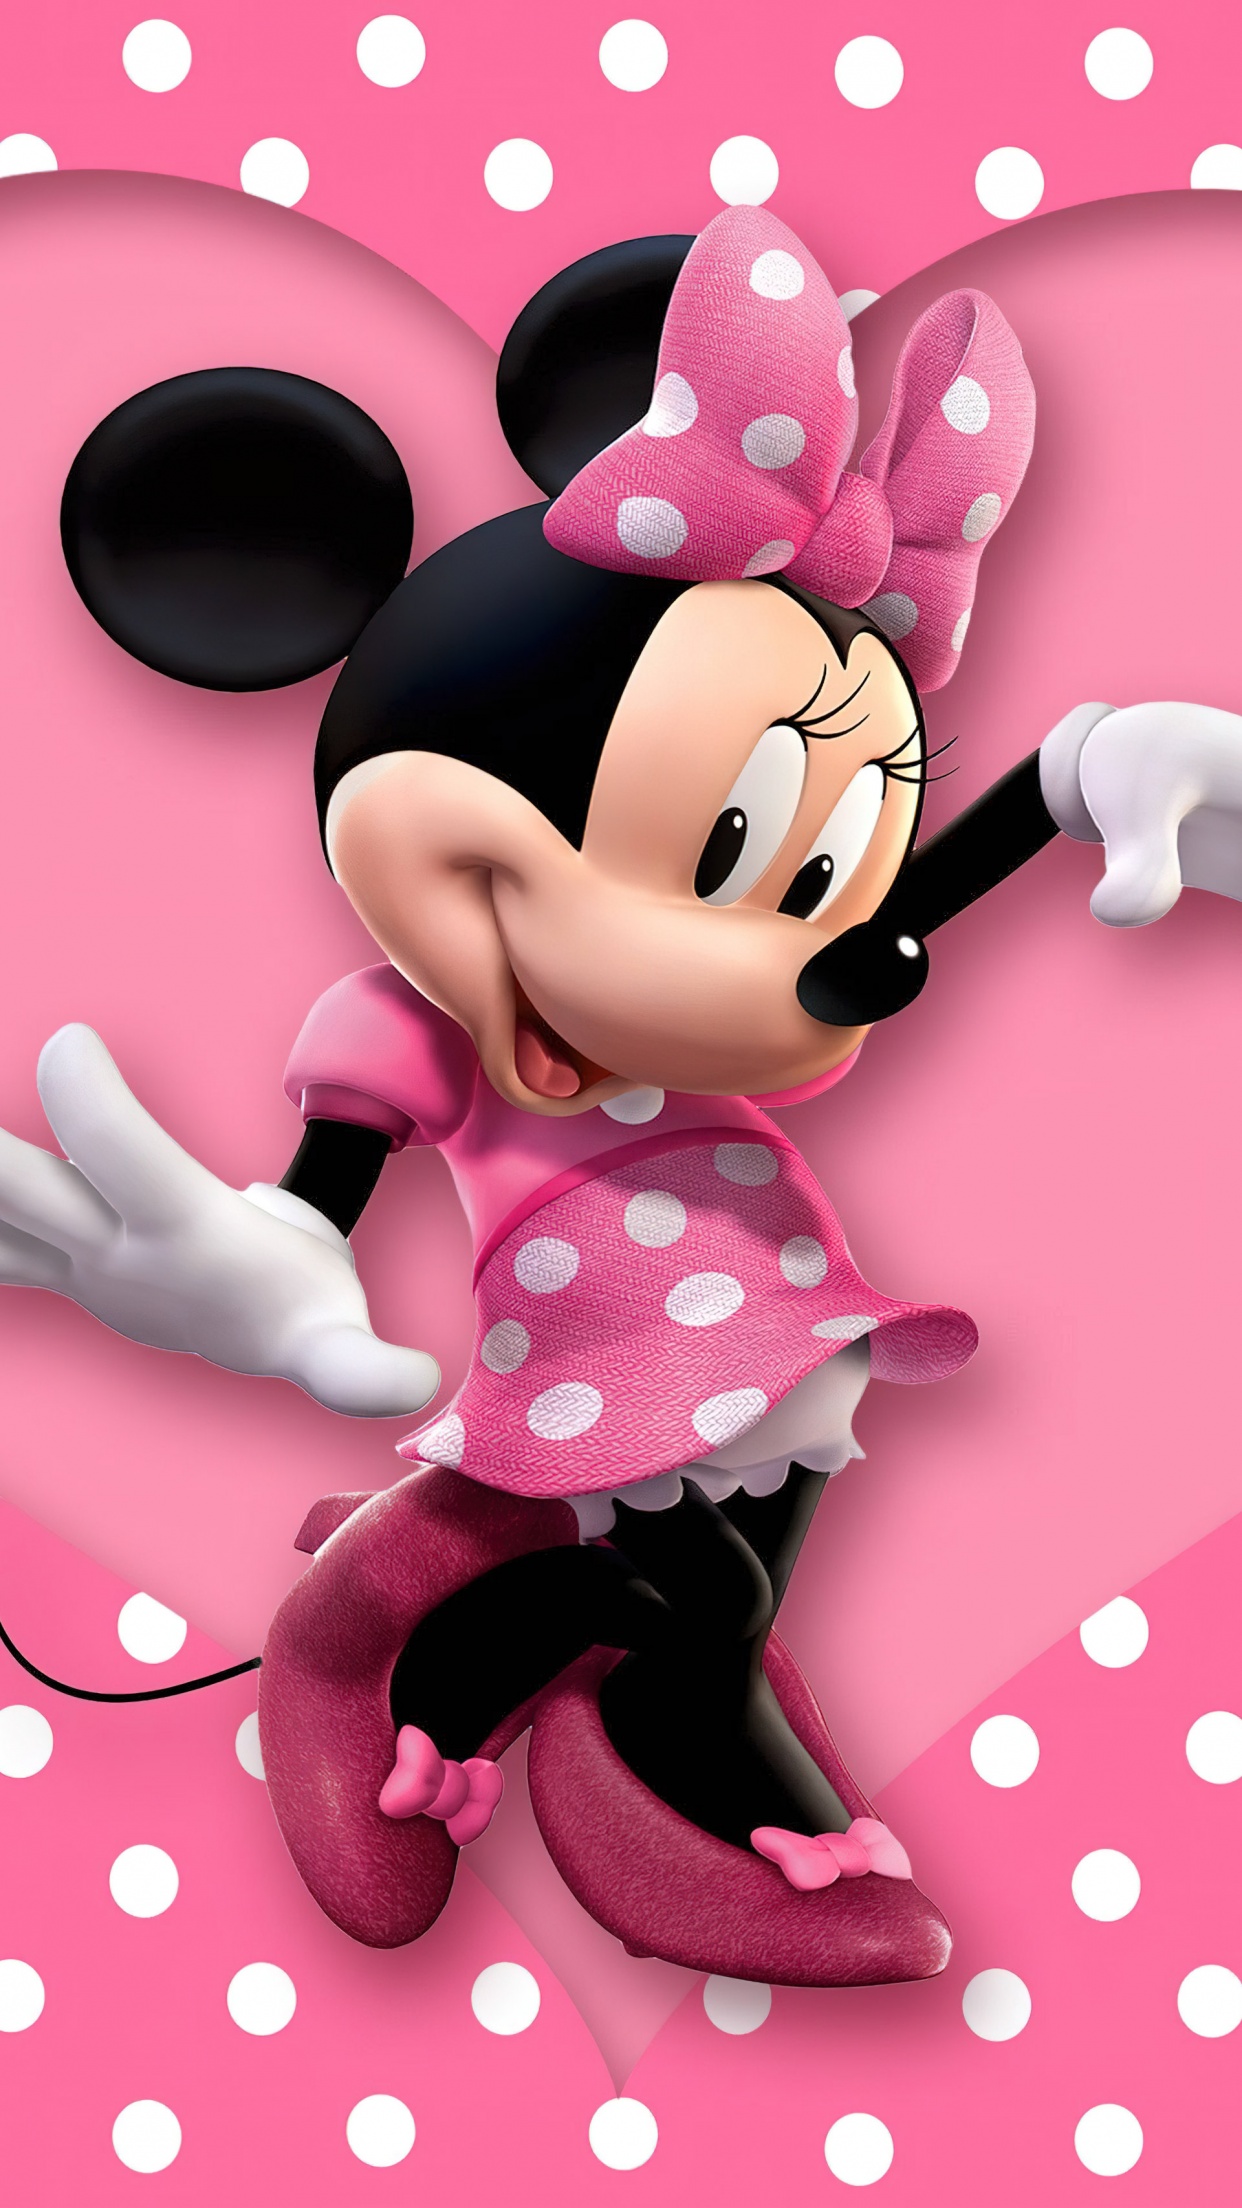 micMouythai shadow  Mickey mouse art Mickey mouse pictures Mickey mouse  wallpaper